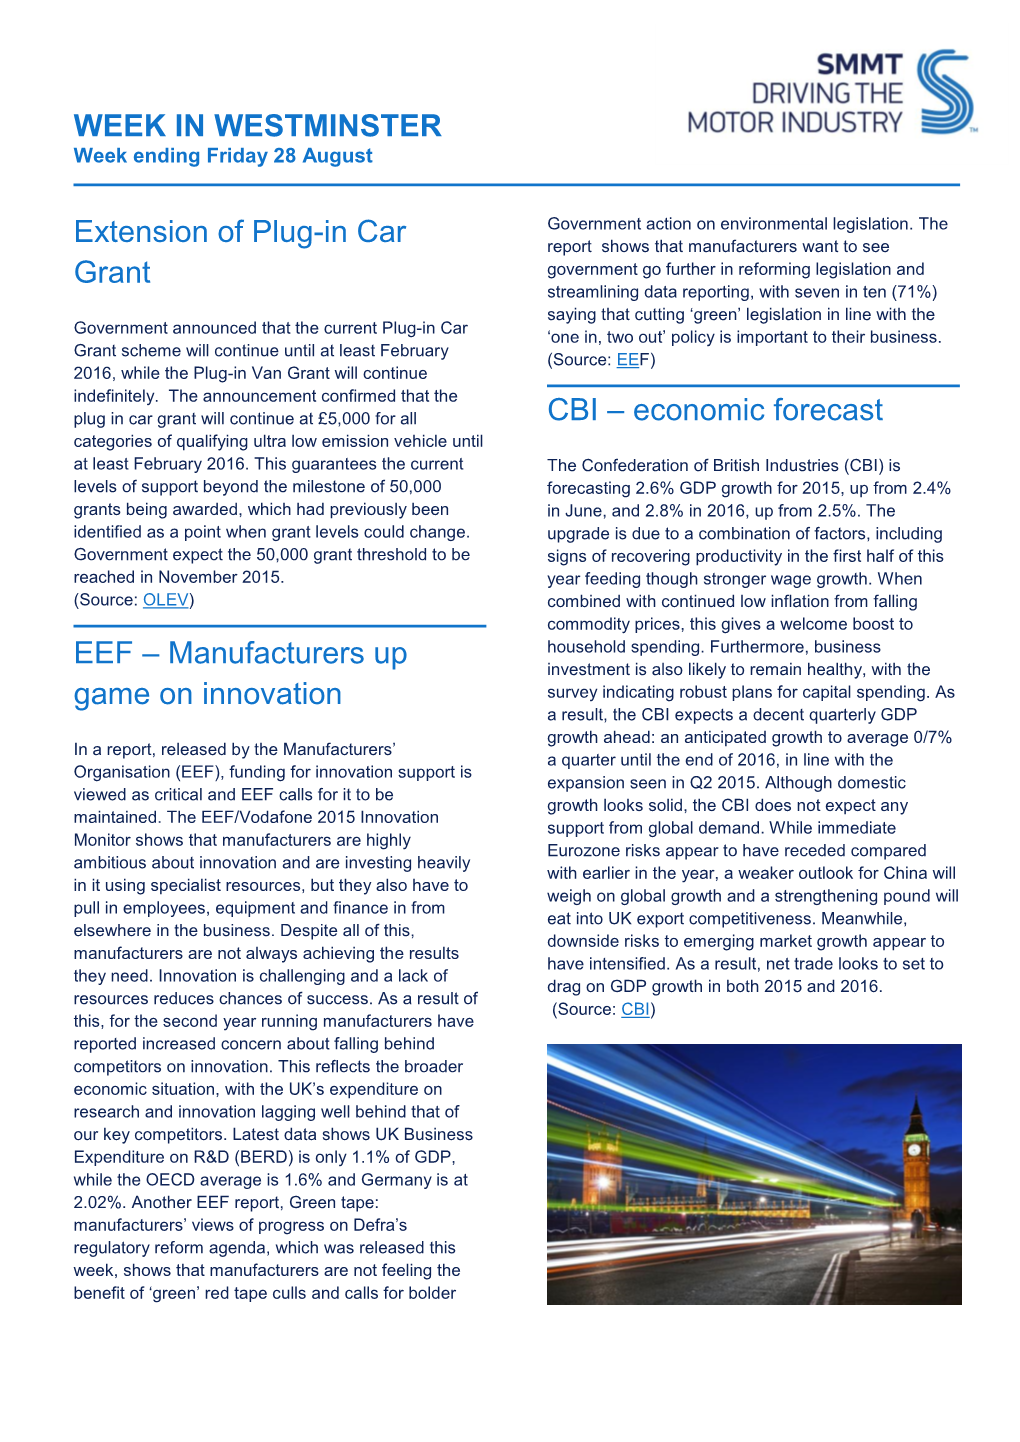 WEEK in WESTMINSTER Extension of Plug-In Car Grant EEF – Manufacturers up Game on Innovation CBI – Economic Forecast